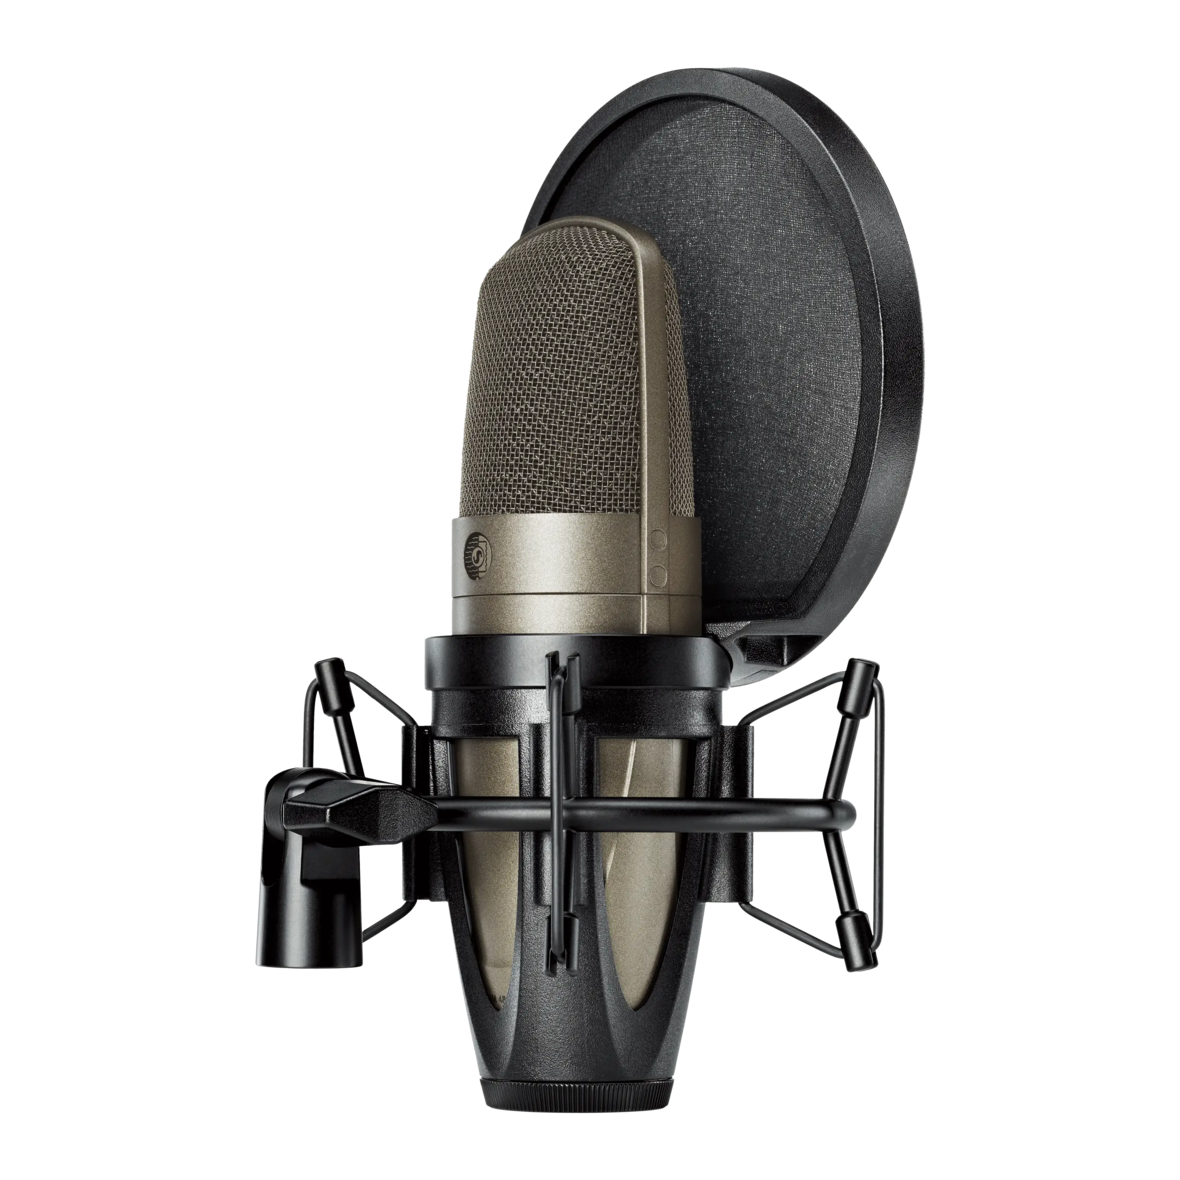 https://products.shureweb.eu/shure_product_db/product_images/files/de9/154/56-/header_transparent/5b16240a9abe609427acd3fb2cec6263.png